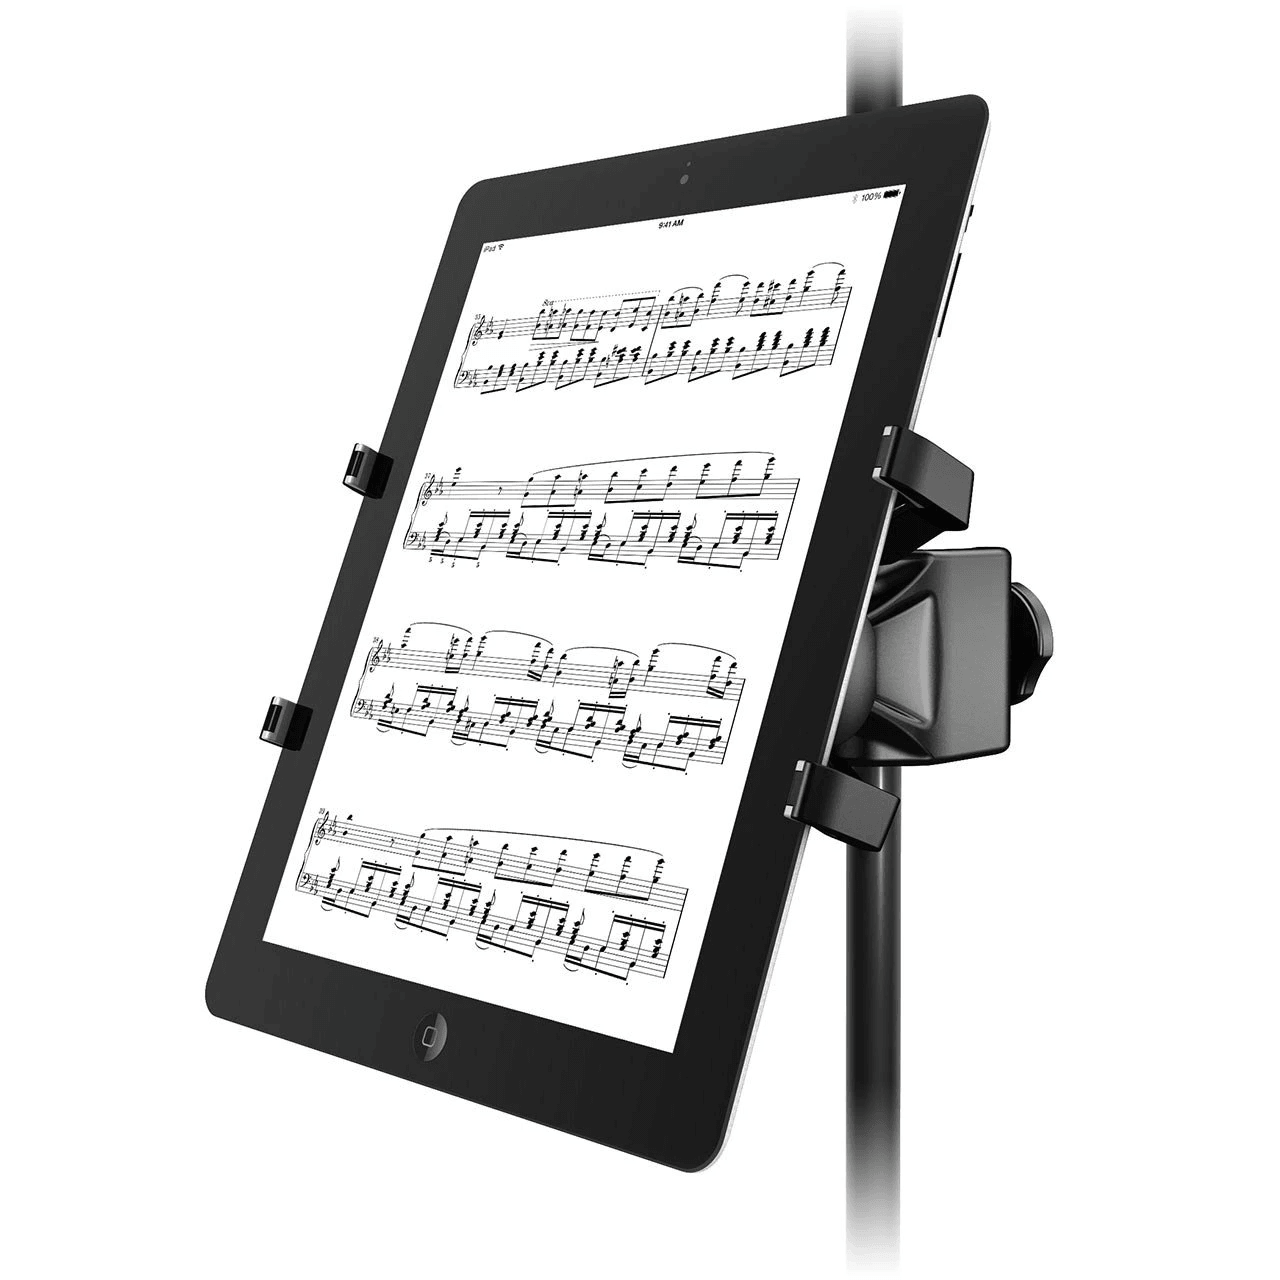 iKlip Xpand Universal Microphone Stand Mount For Tablet - Live & Recording - Accessories by IK Multimedia at Muso's Stuff